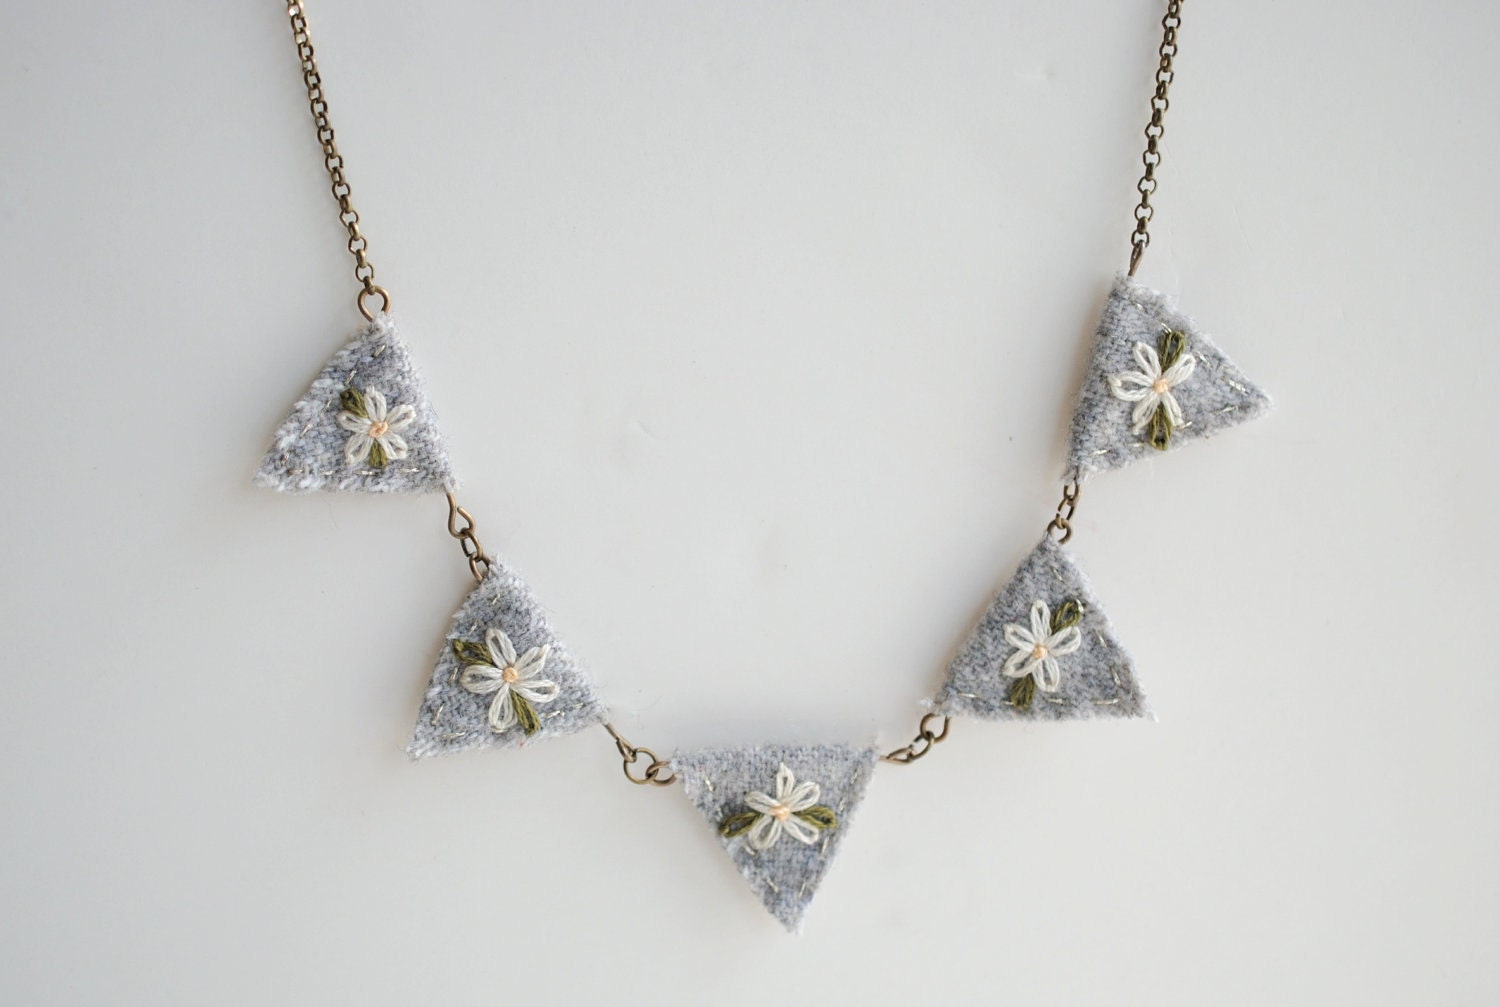 Daisy Necklace on Bunting Necklace  Daisy Chain Necklace  Hand Embroidered Gray Wool